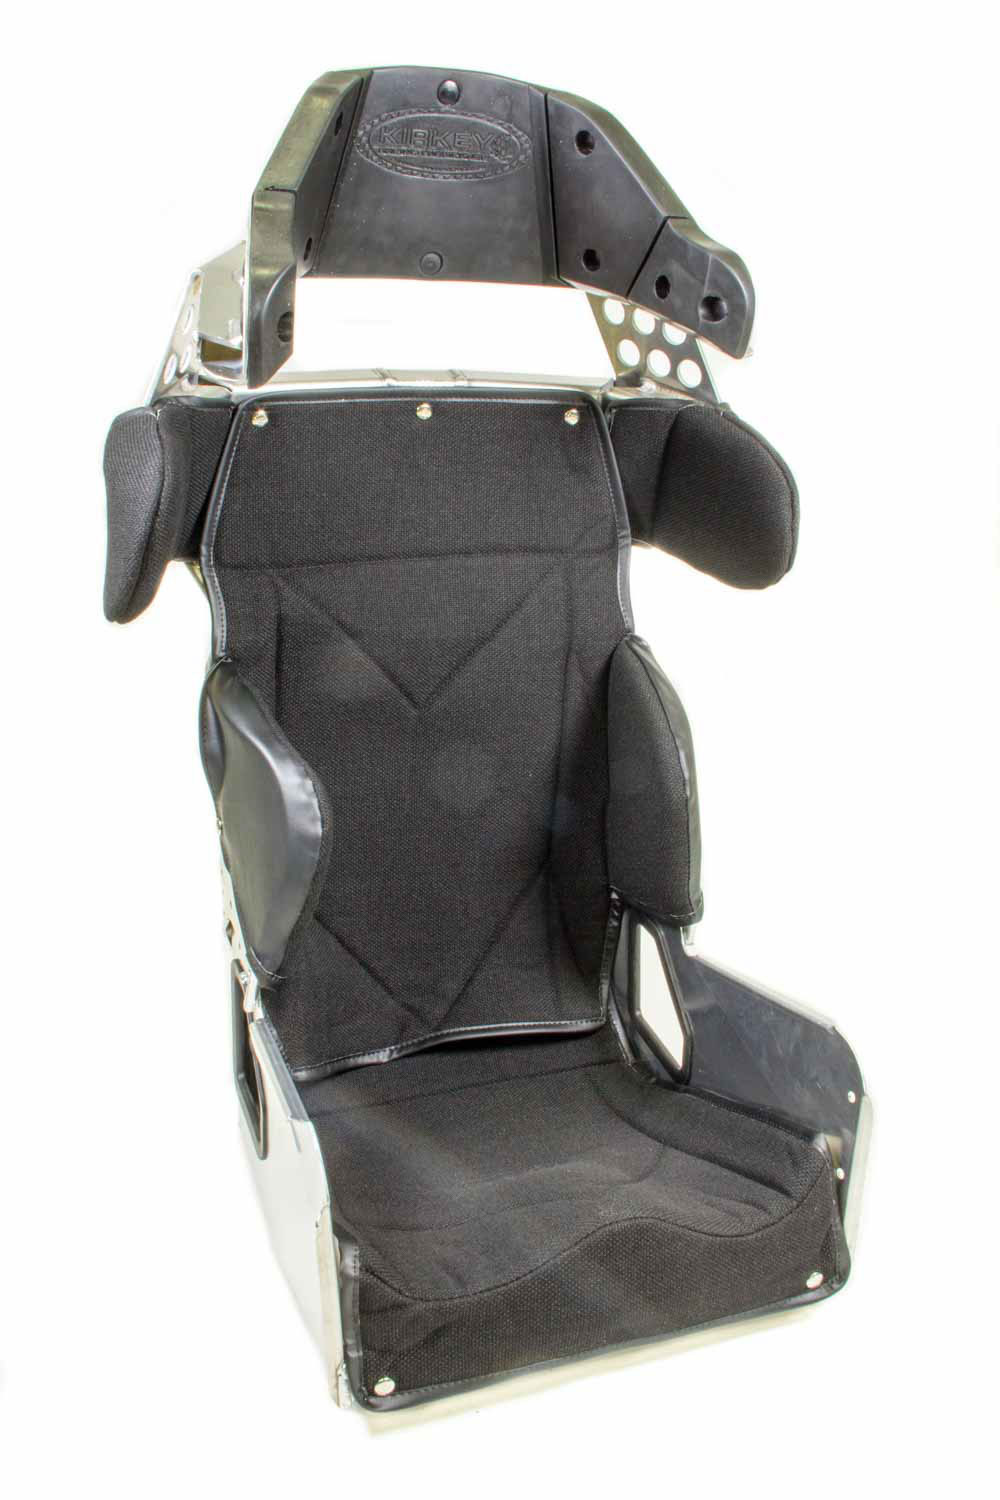 Kirkey Racing Seats 7015011 Seat Cover, Snap Attachment, Tweed, Black, Kirkey 70 Series Oval, 15 in Wide Seat, Each